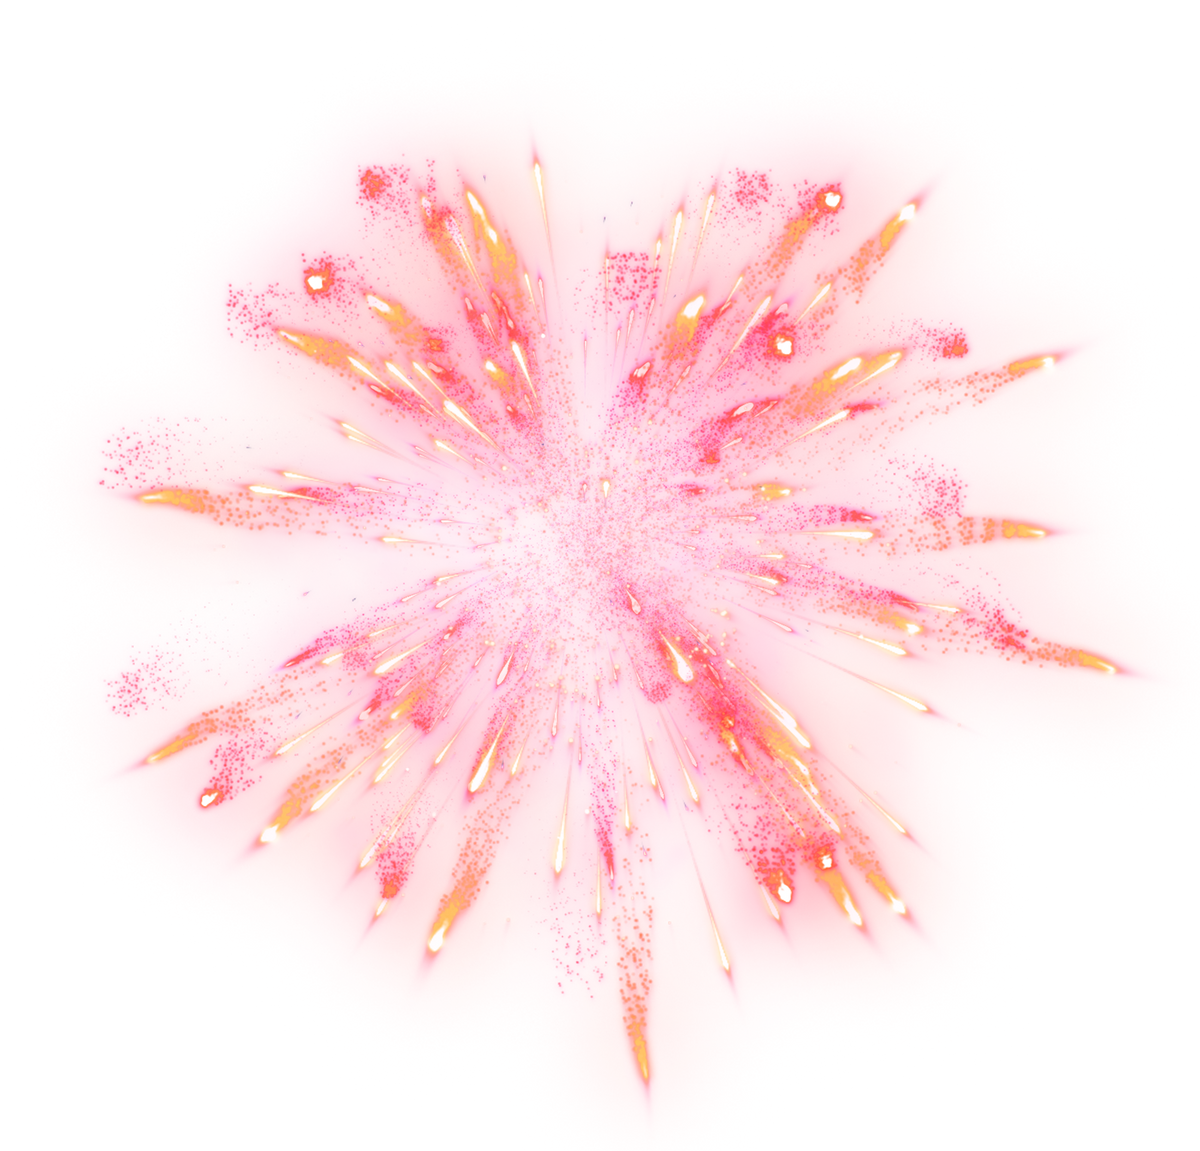 Red Firework Explosion Watercolor